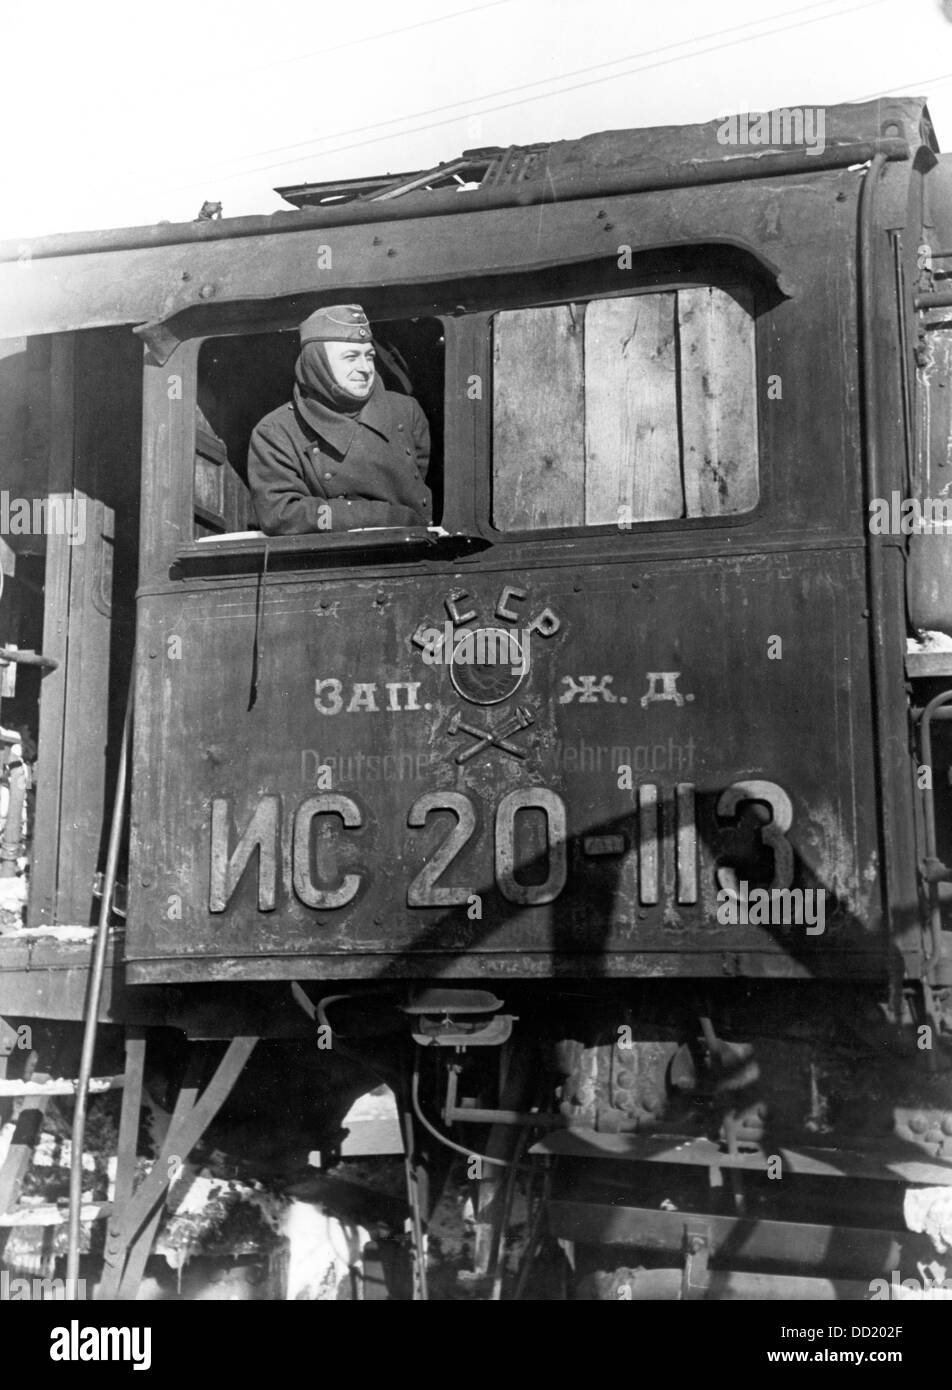 A German railway employee is pictured in a captured Russian locomotive in the locomotive depot in Smolensk, Russia, in February 1942. Next to the Russian writing, the words 'Deutsche Wehrmacht' are printed. Photo: Bildarchiv der Eisenbahnstiftung/RVM (minimum fee 60 euros) Stock Photo